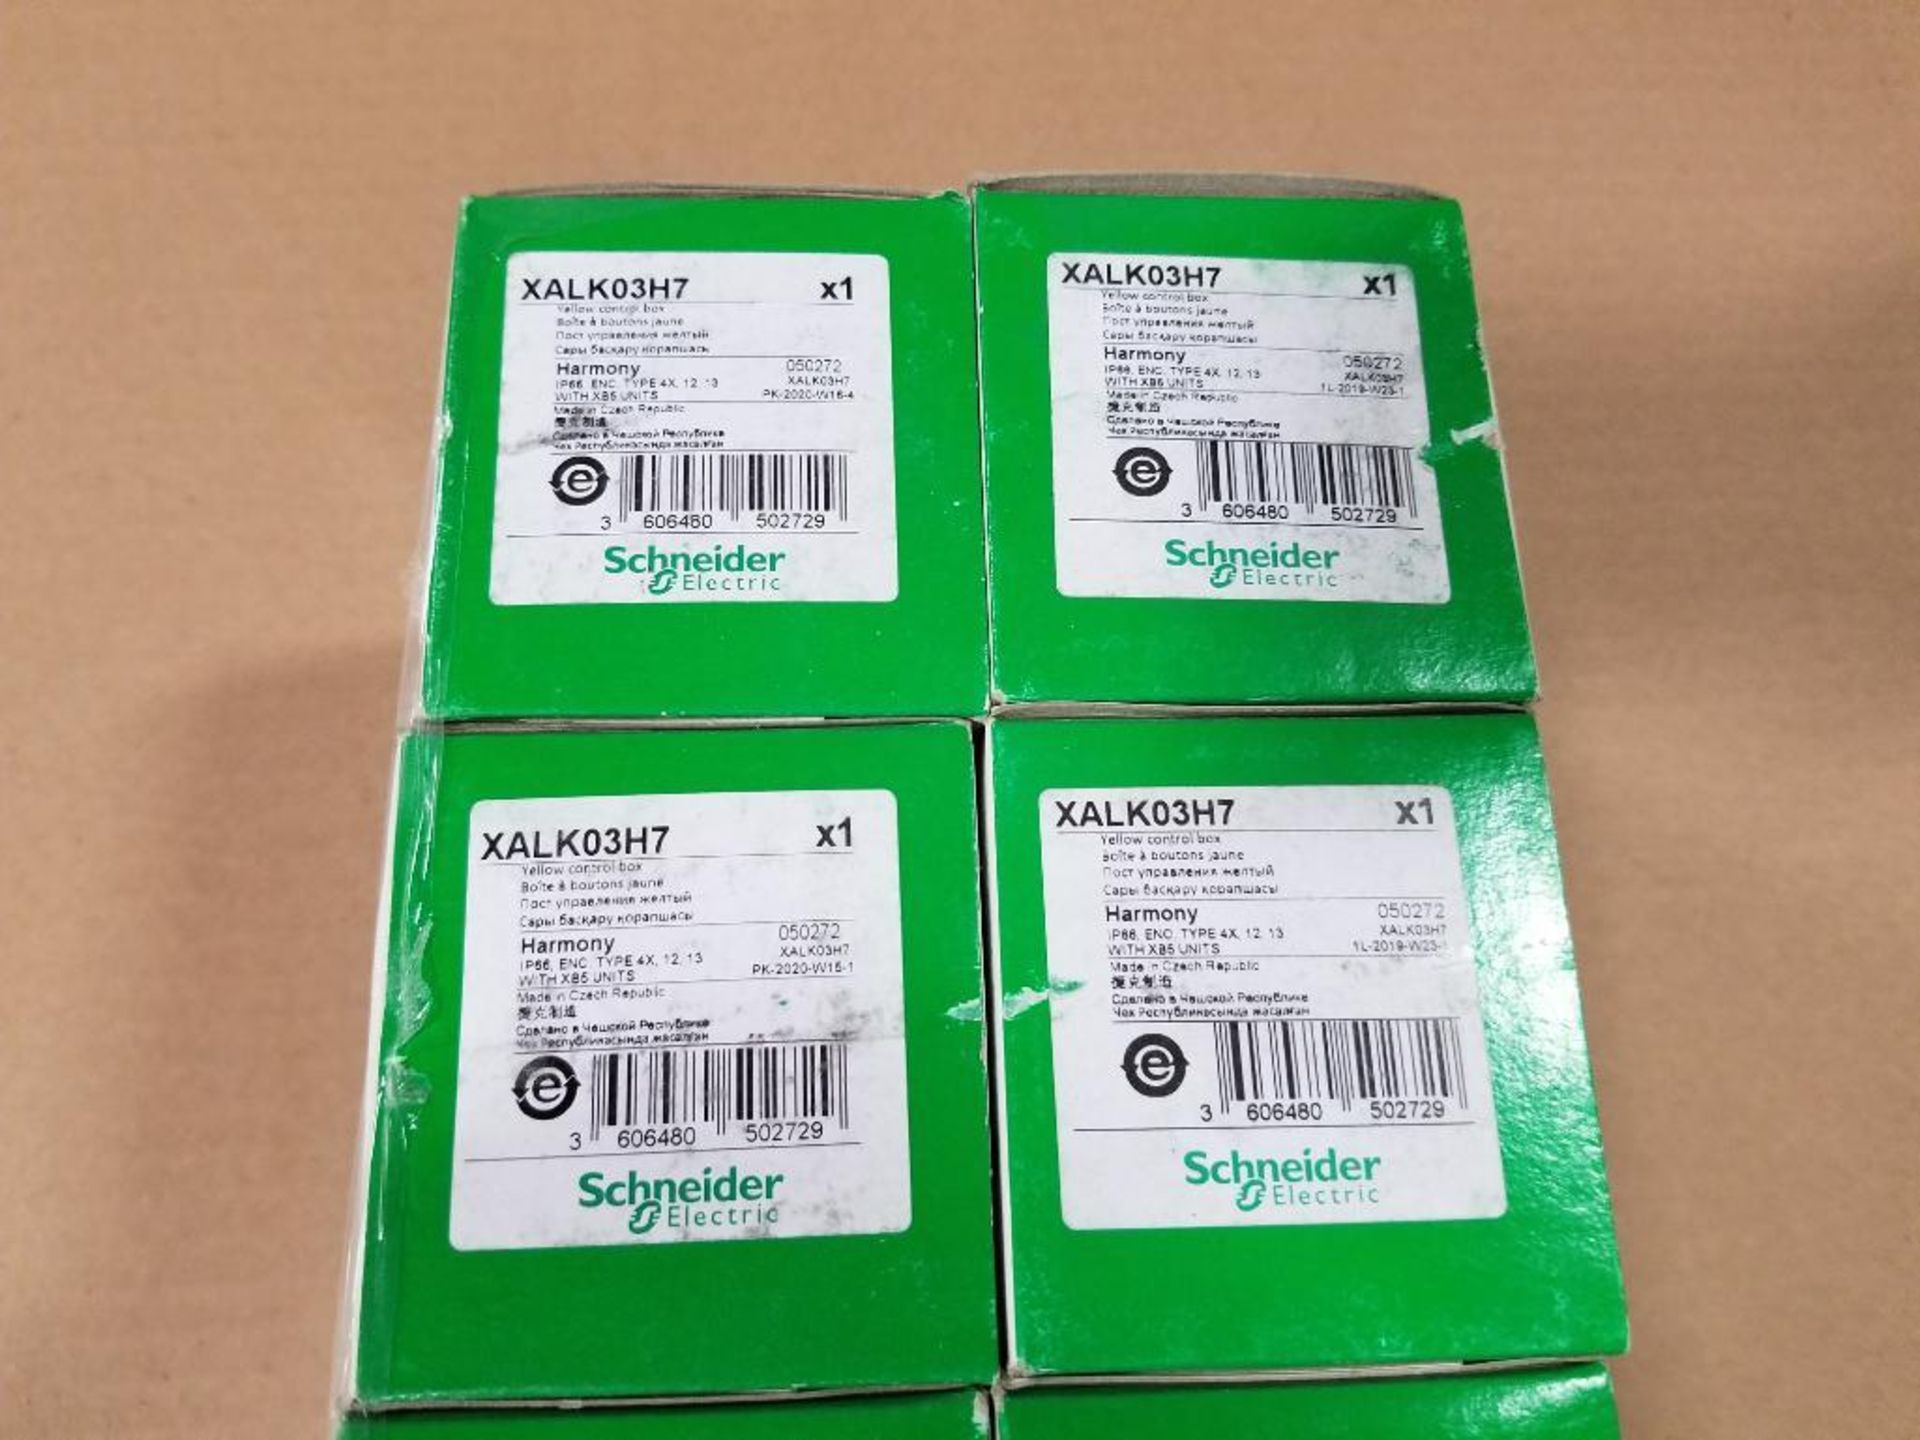 Qty 10 - Schneider Electric XALK03H7 3-unit pushbutton enclosure. New in box. - Image 4 of 8